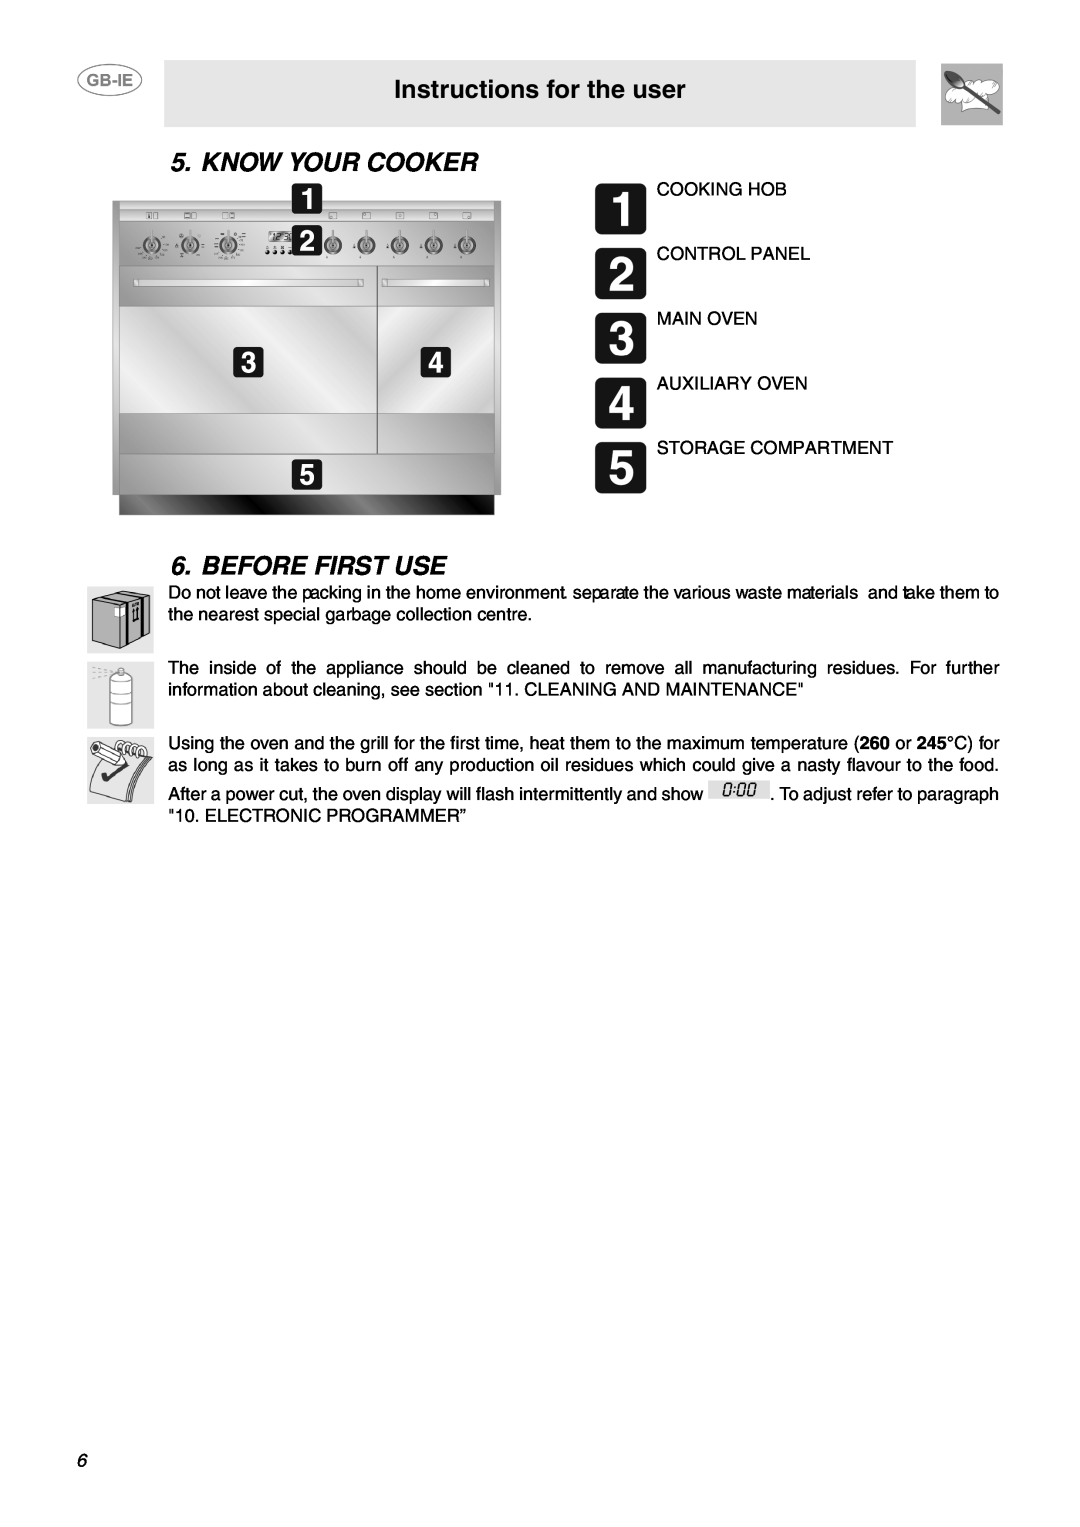 Smeg CC92MFX5, CC92MFX6 manual Instructions for the user, Know Your Cooker, Before First Use 